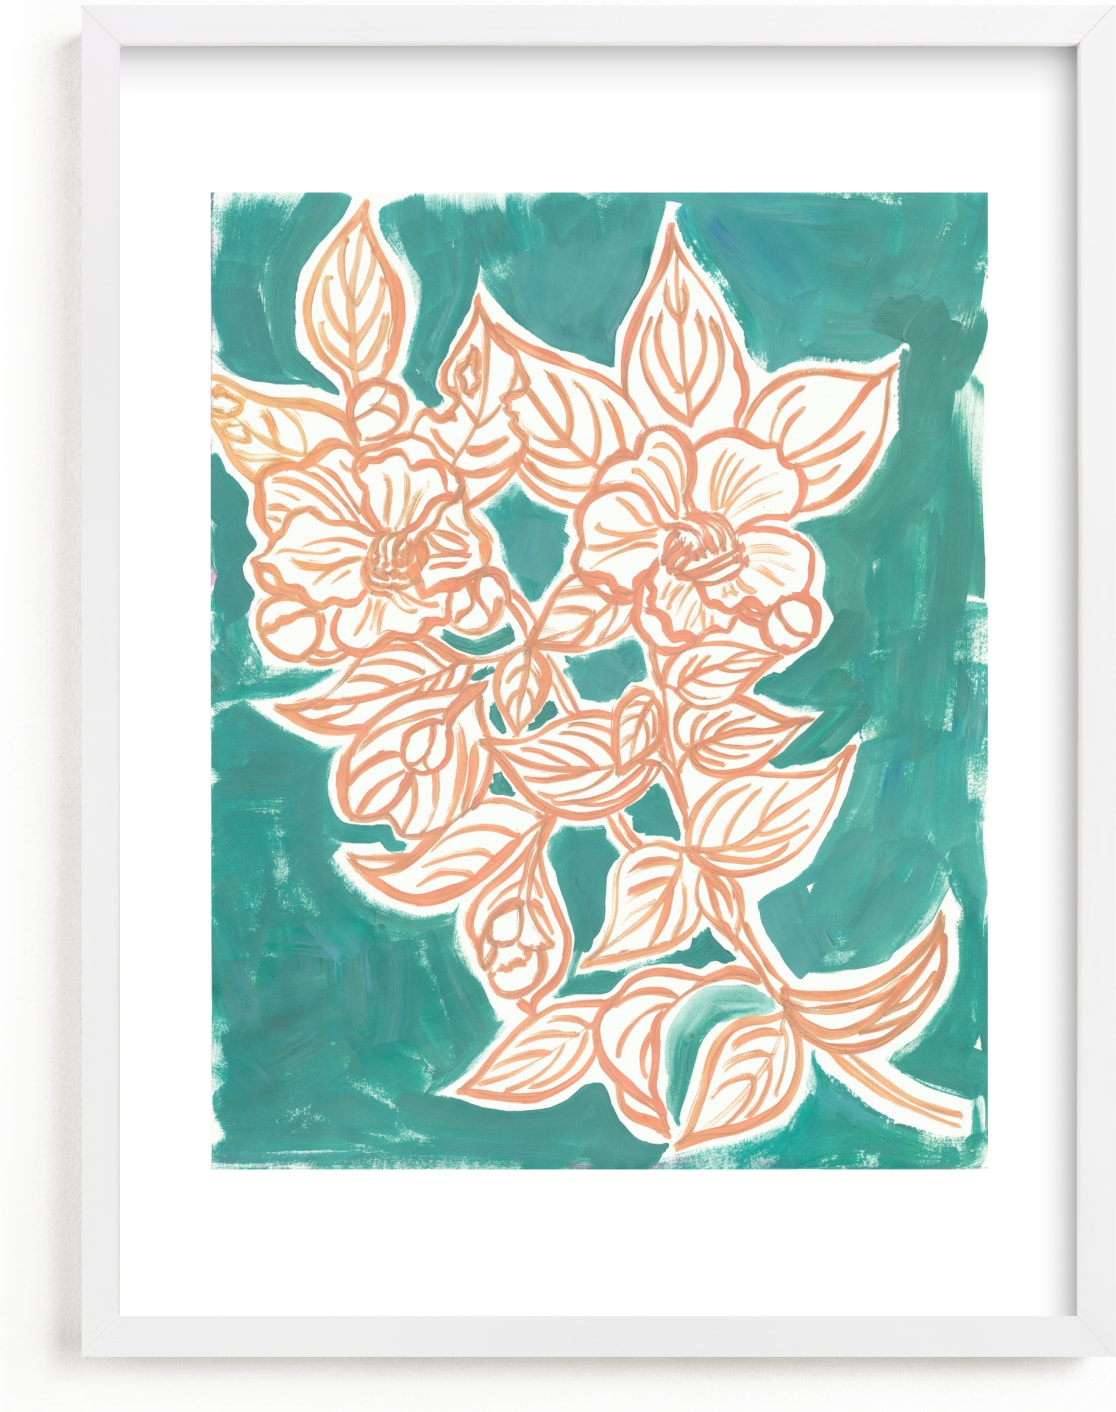 This is a white kids wall art by Lise Gulassa called Lush Botanical Gallery III.